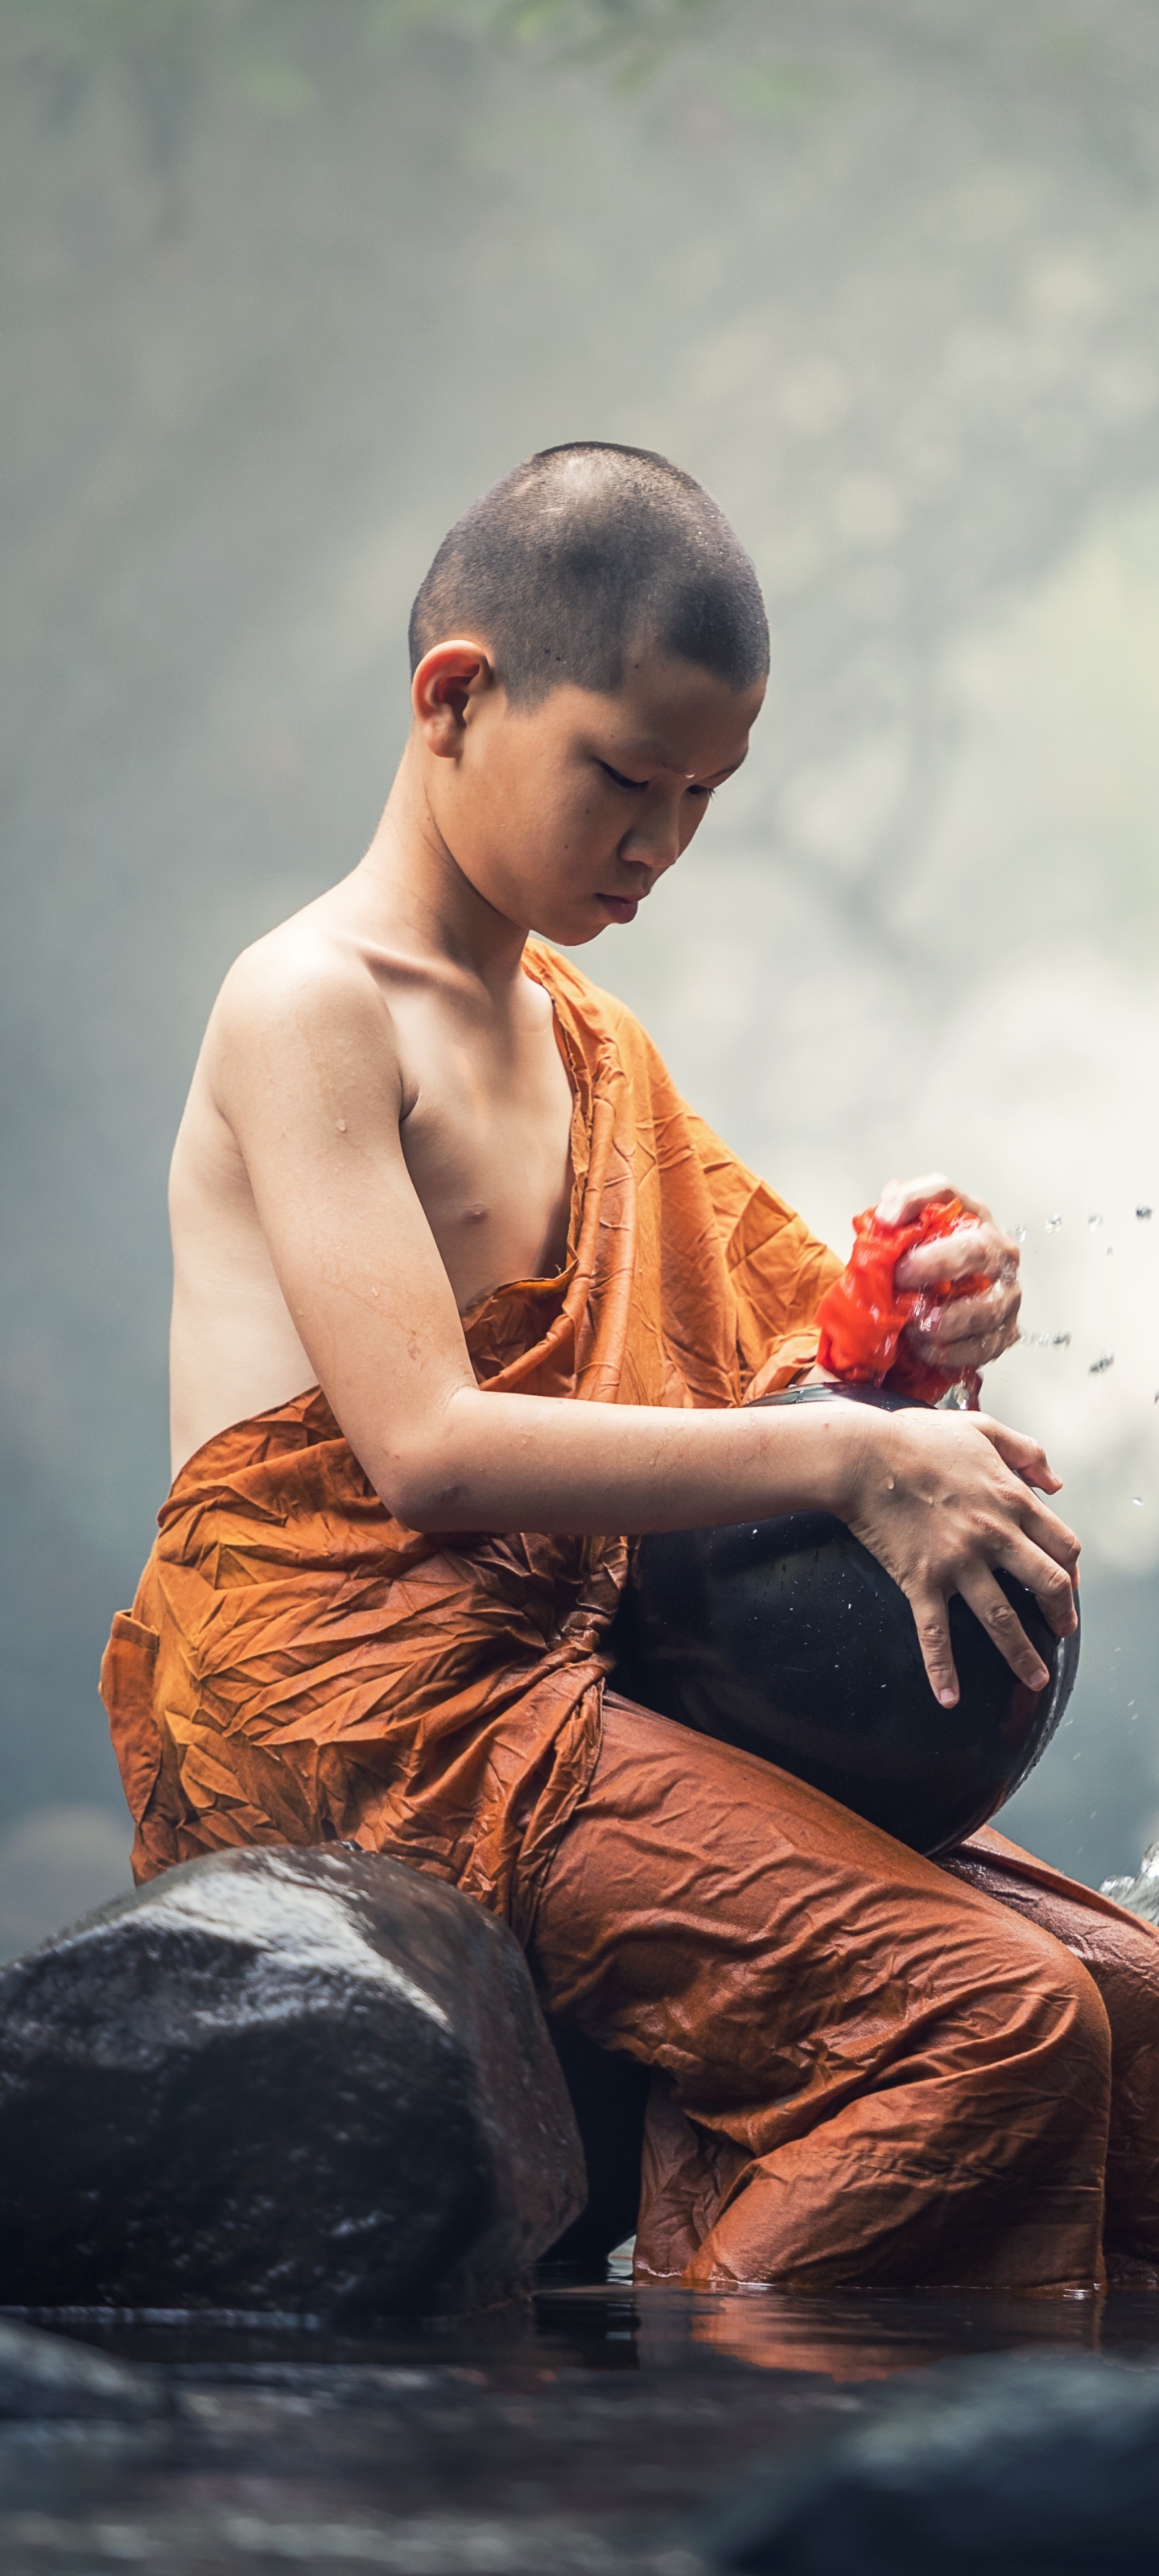 Tow Young Monks in Bangkok